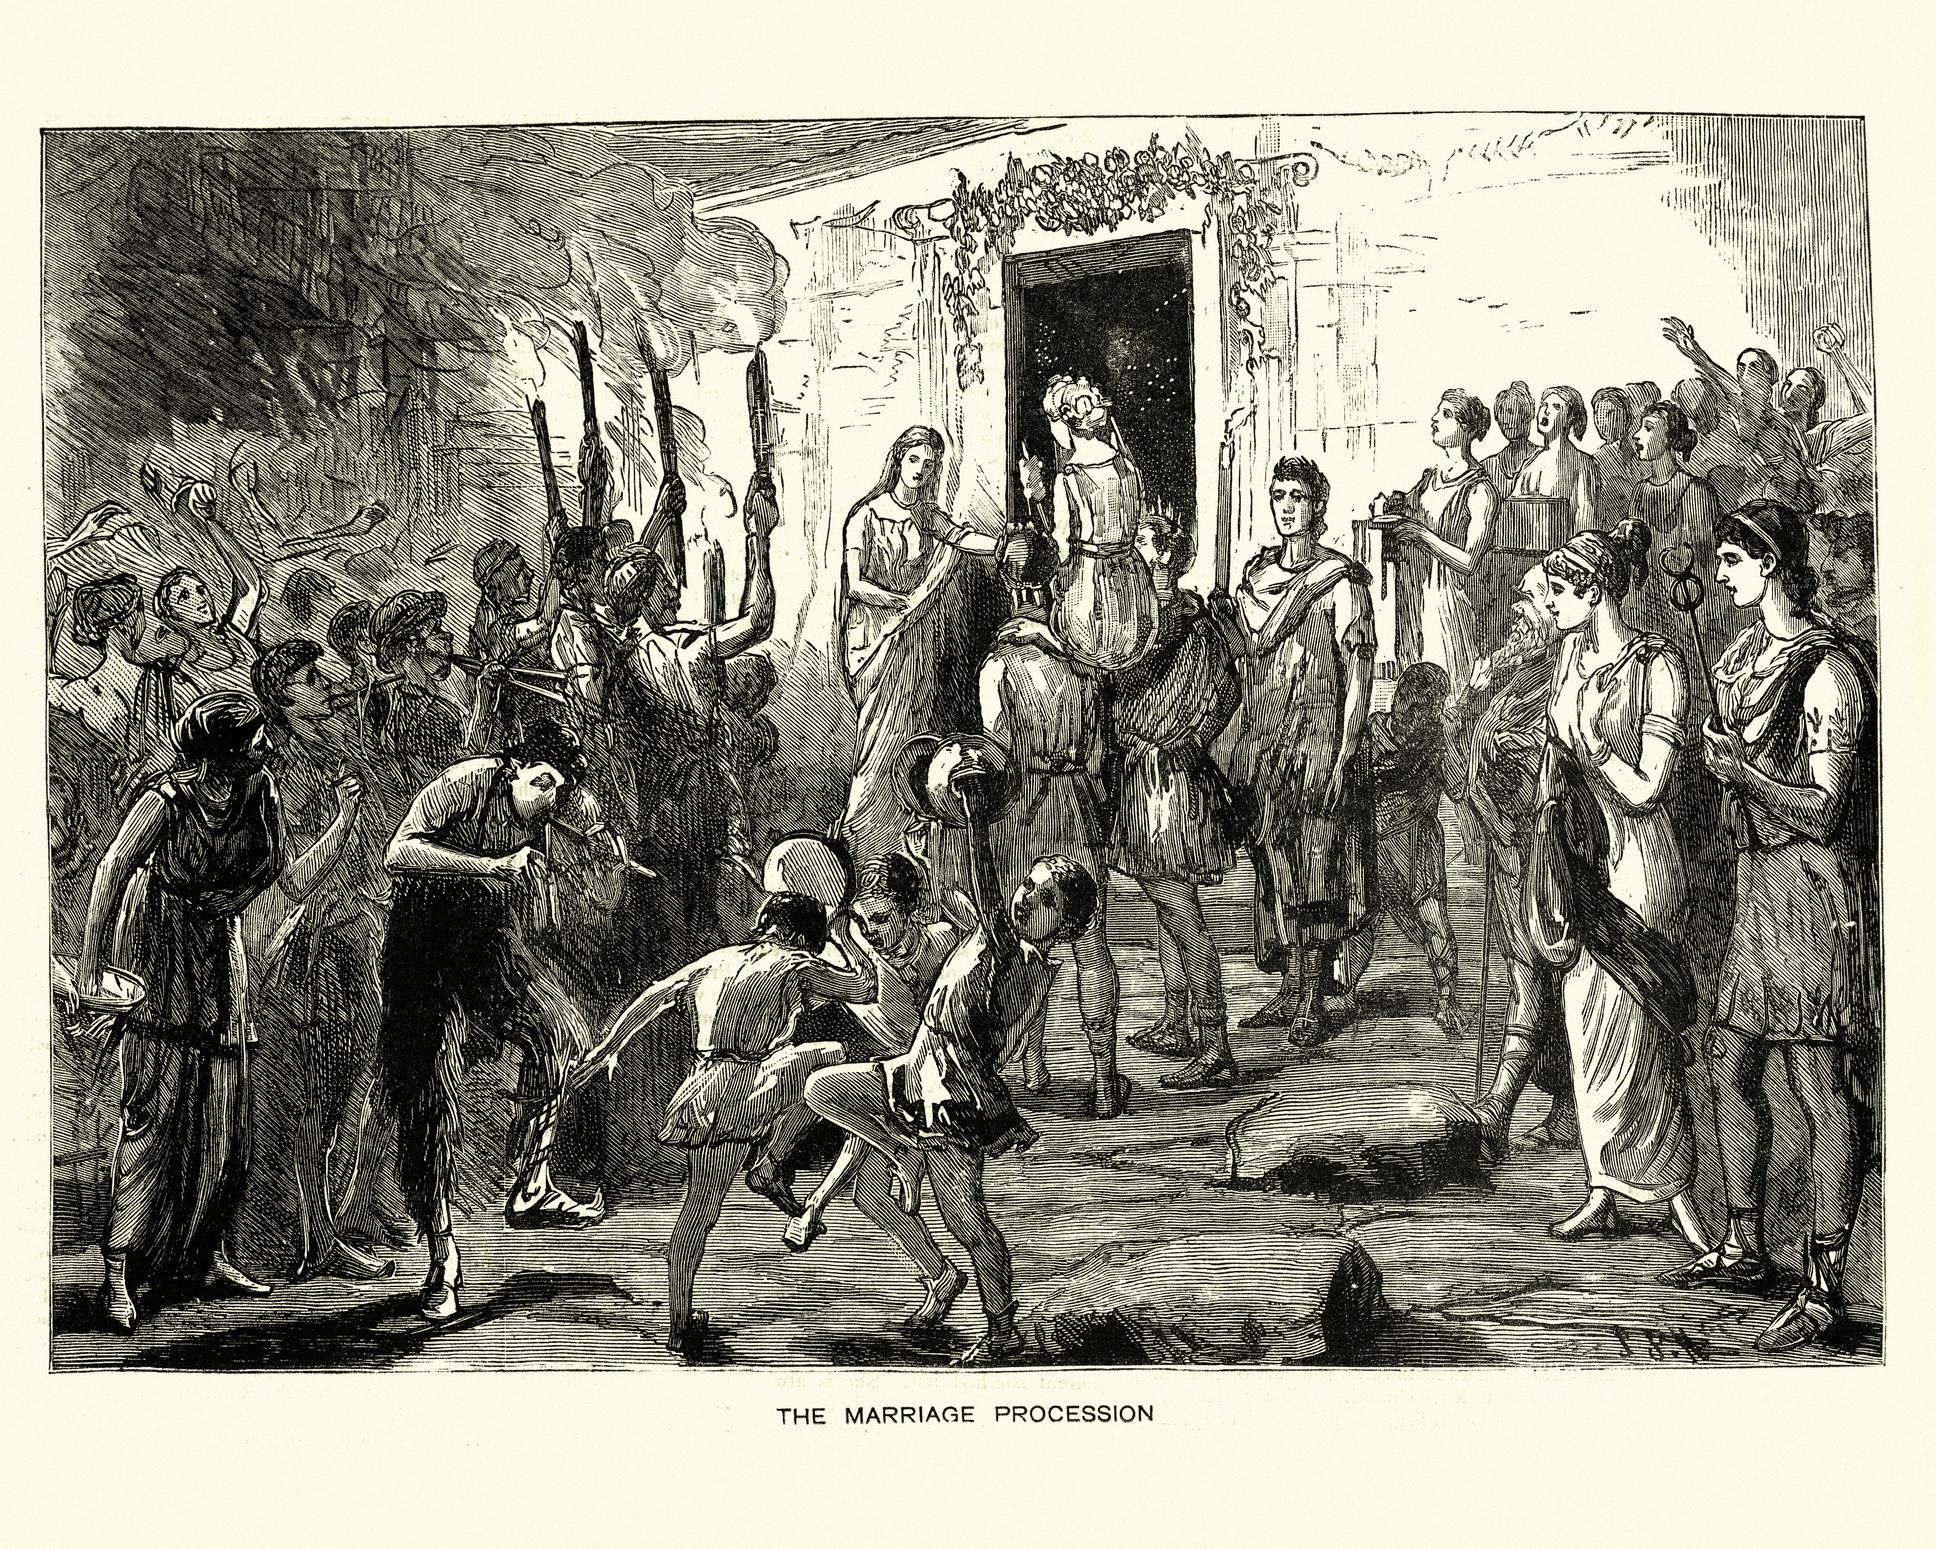 An old rendering of &quot;The Marriage Procession&quot;